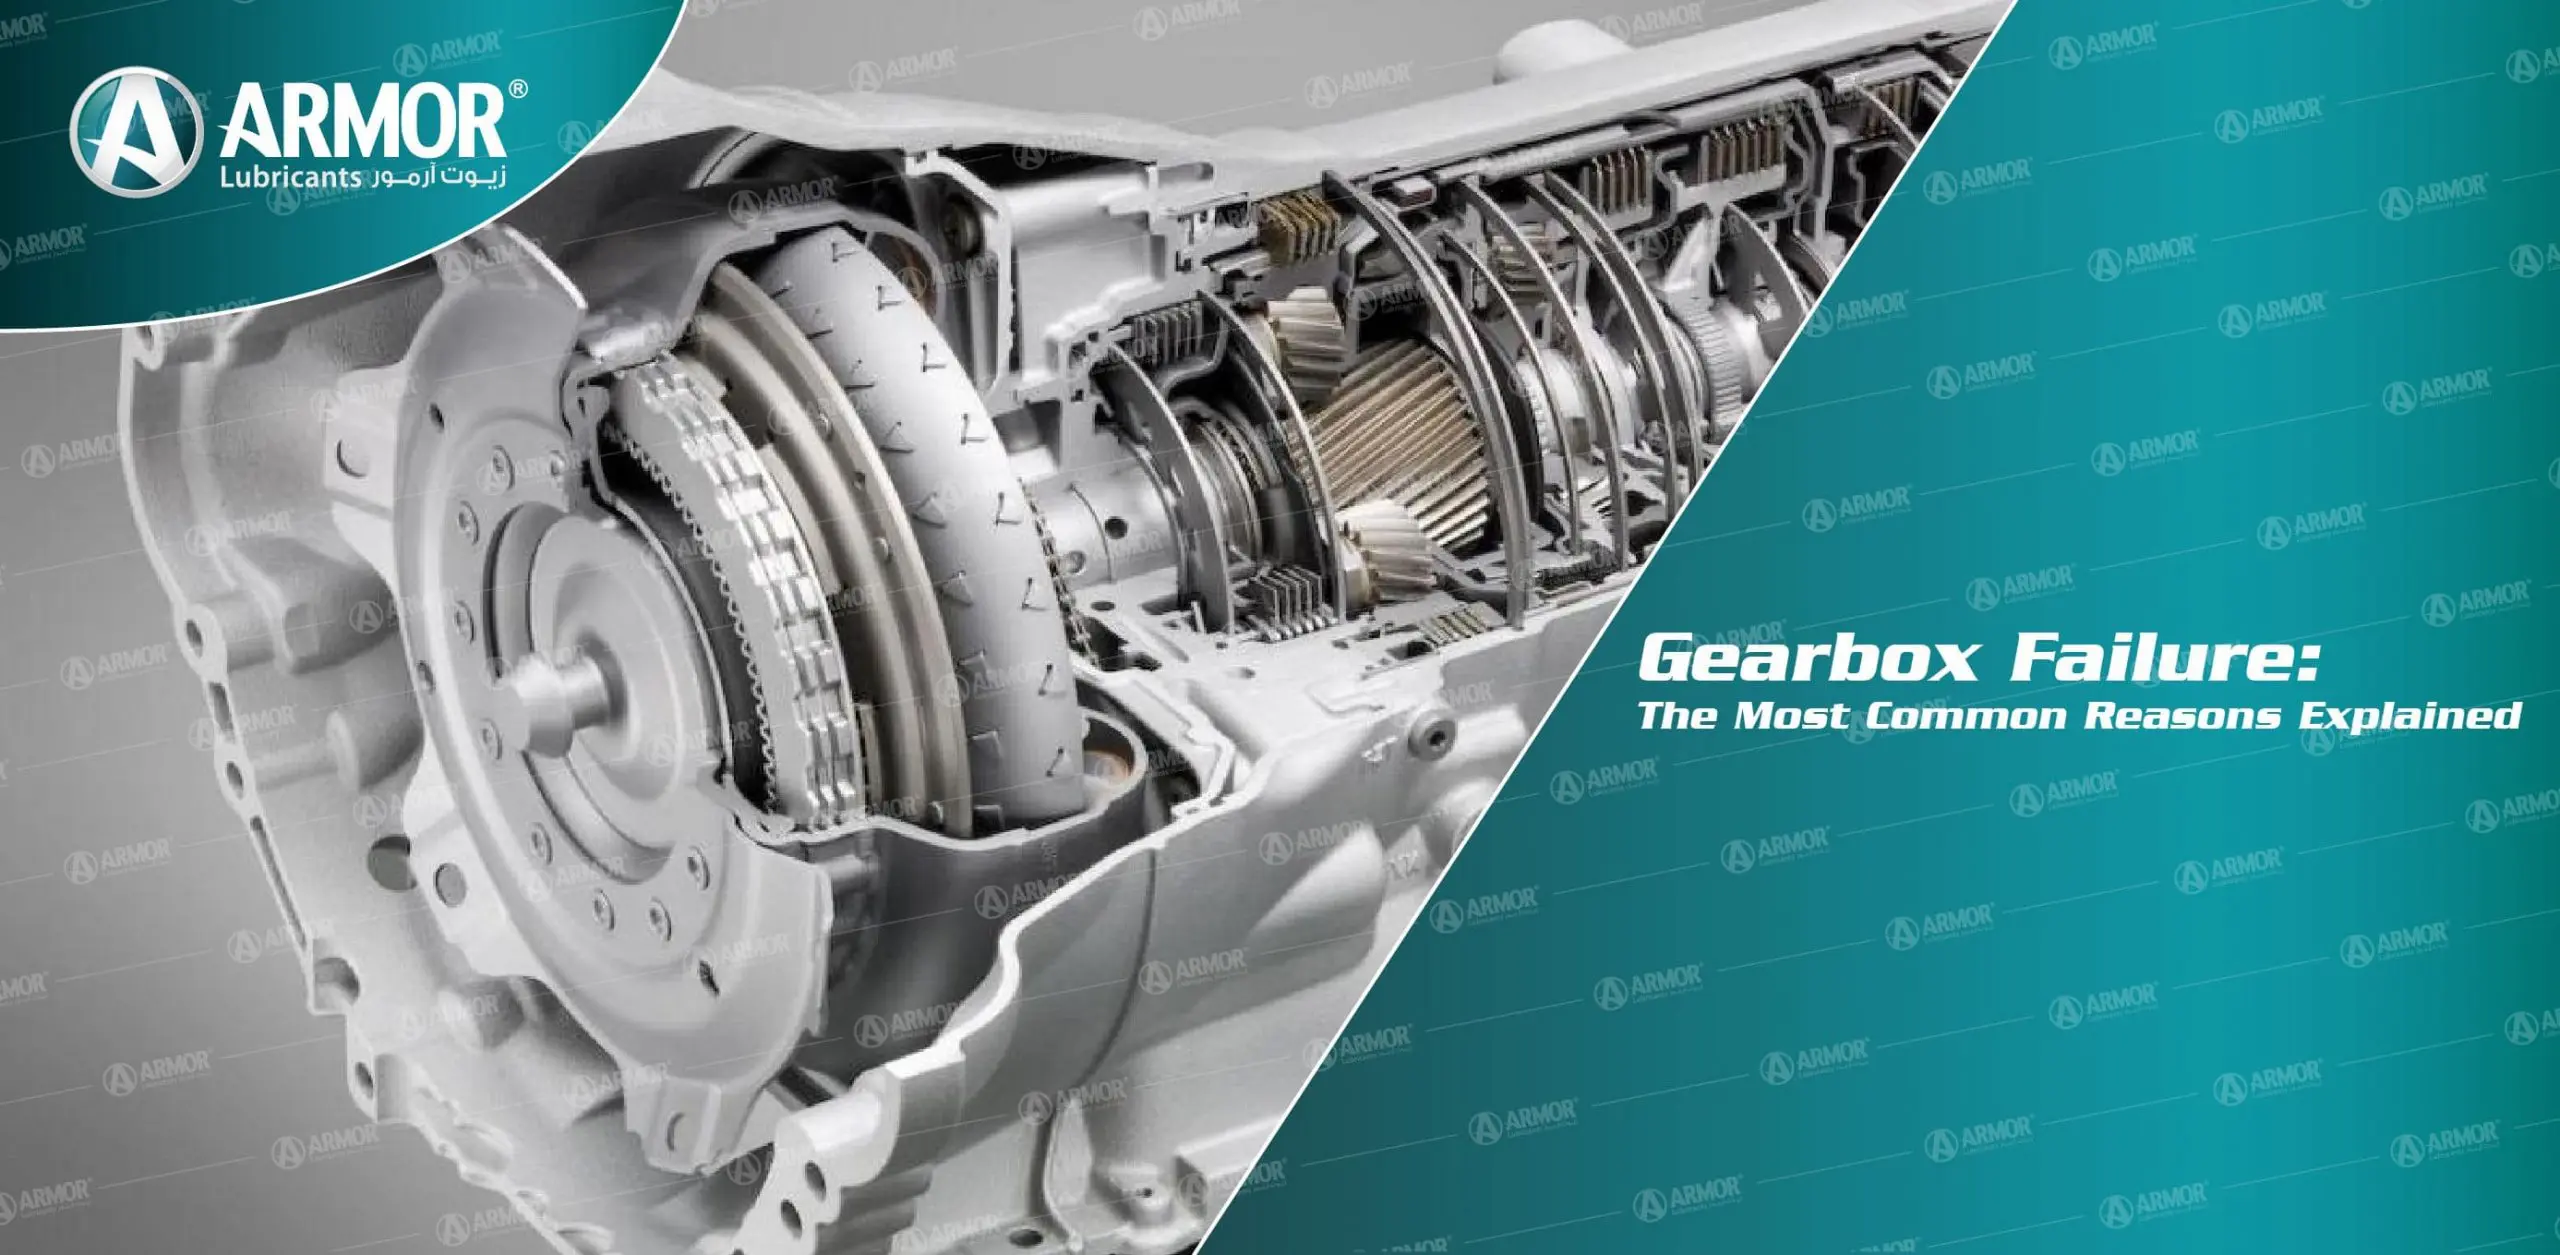 Gearbox Failure Common Reasons Explained